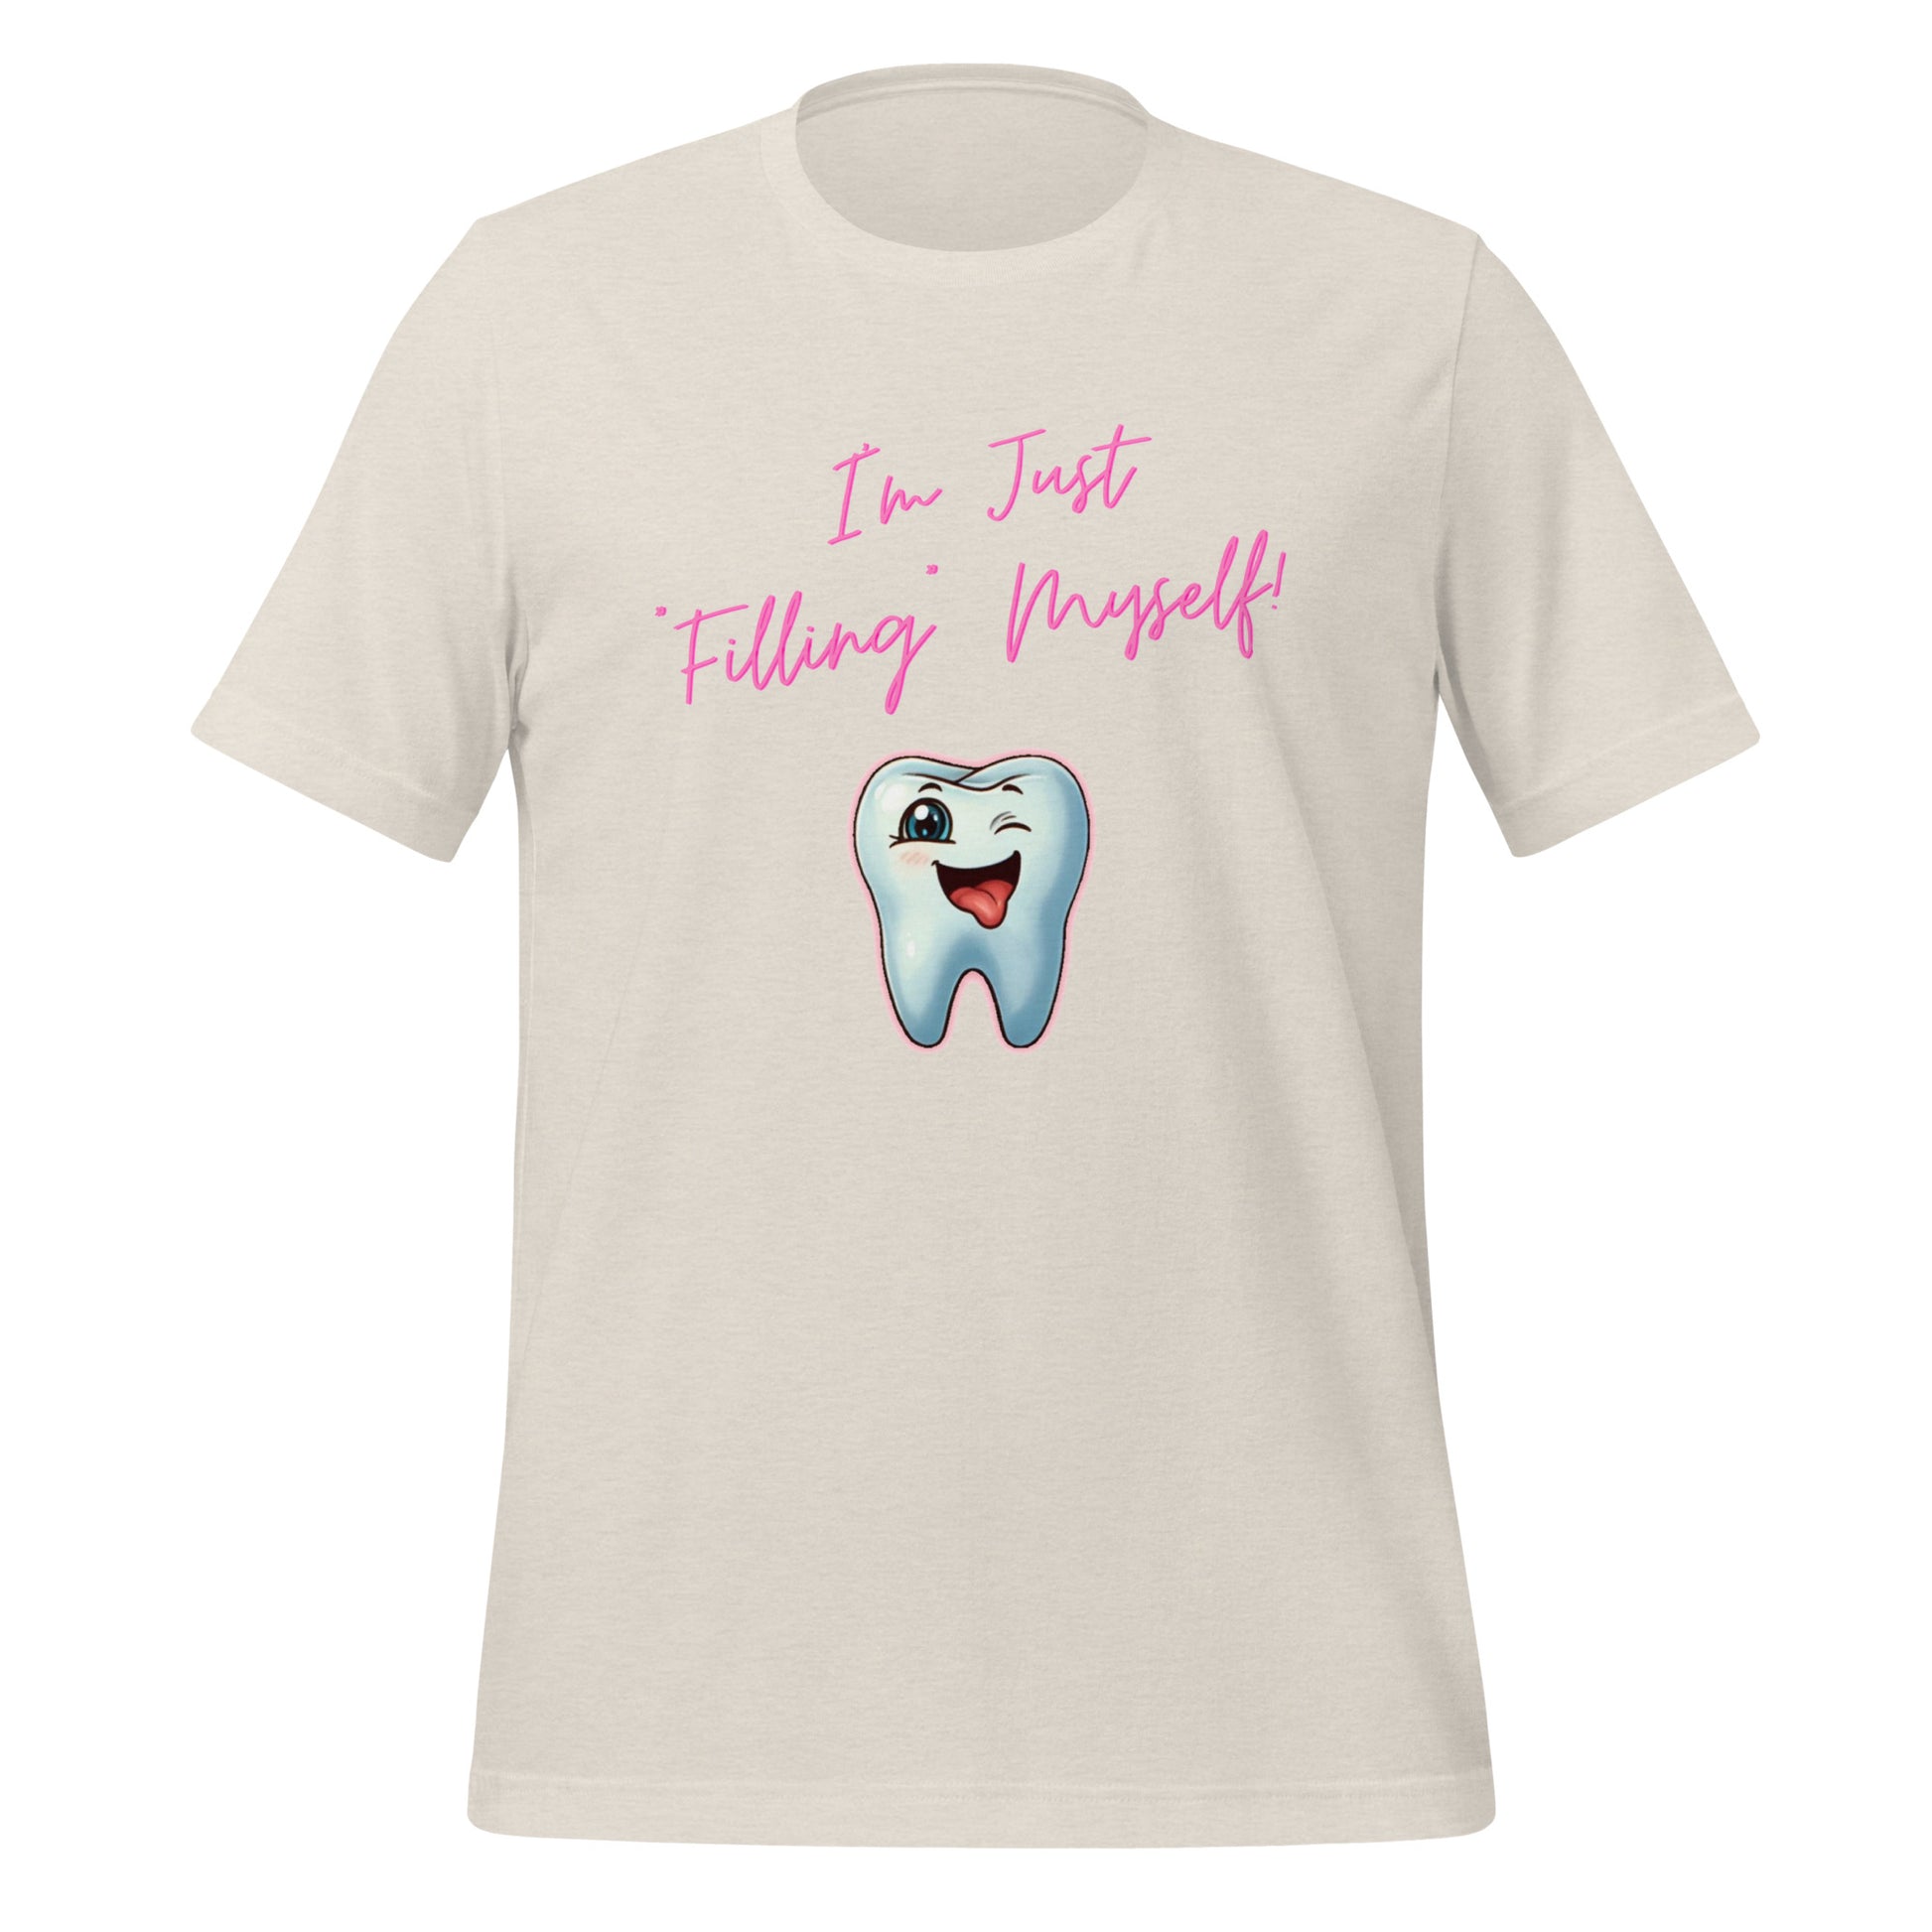 Flirtatious winking cartoon tooth character with the phrase "I'm just filling myself!" Ideal for a funny dental t-shirt or a cute dental assistant shirt. Heather dust color. 